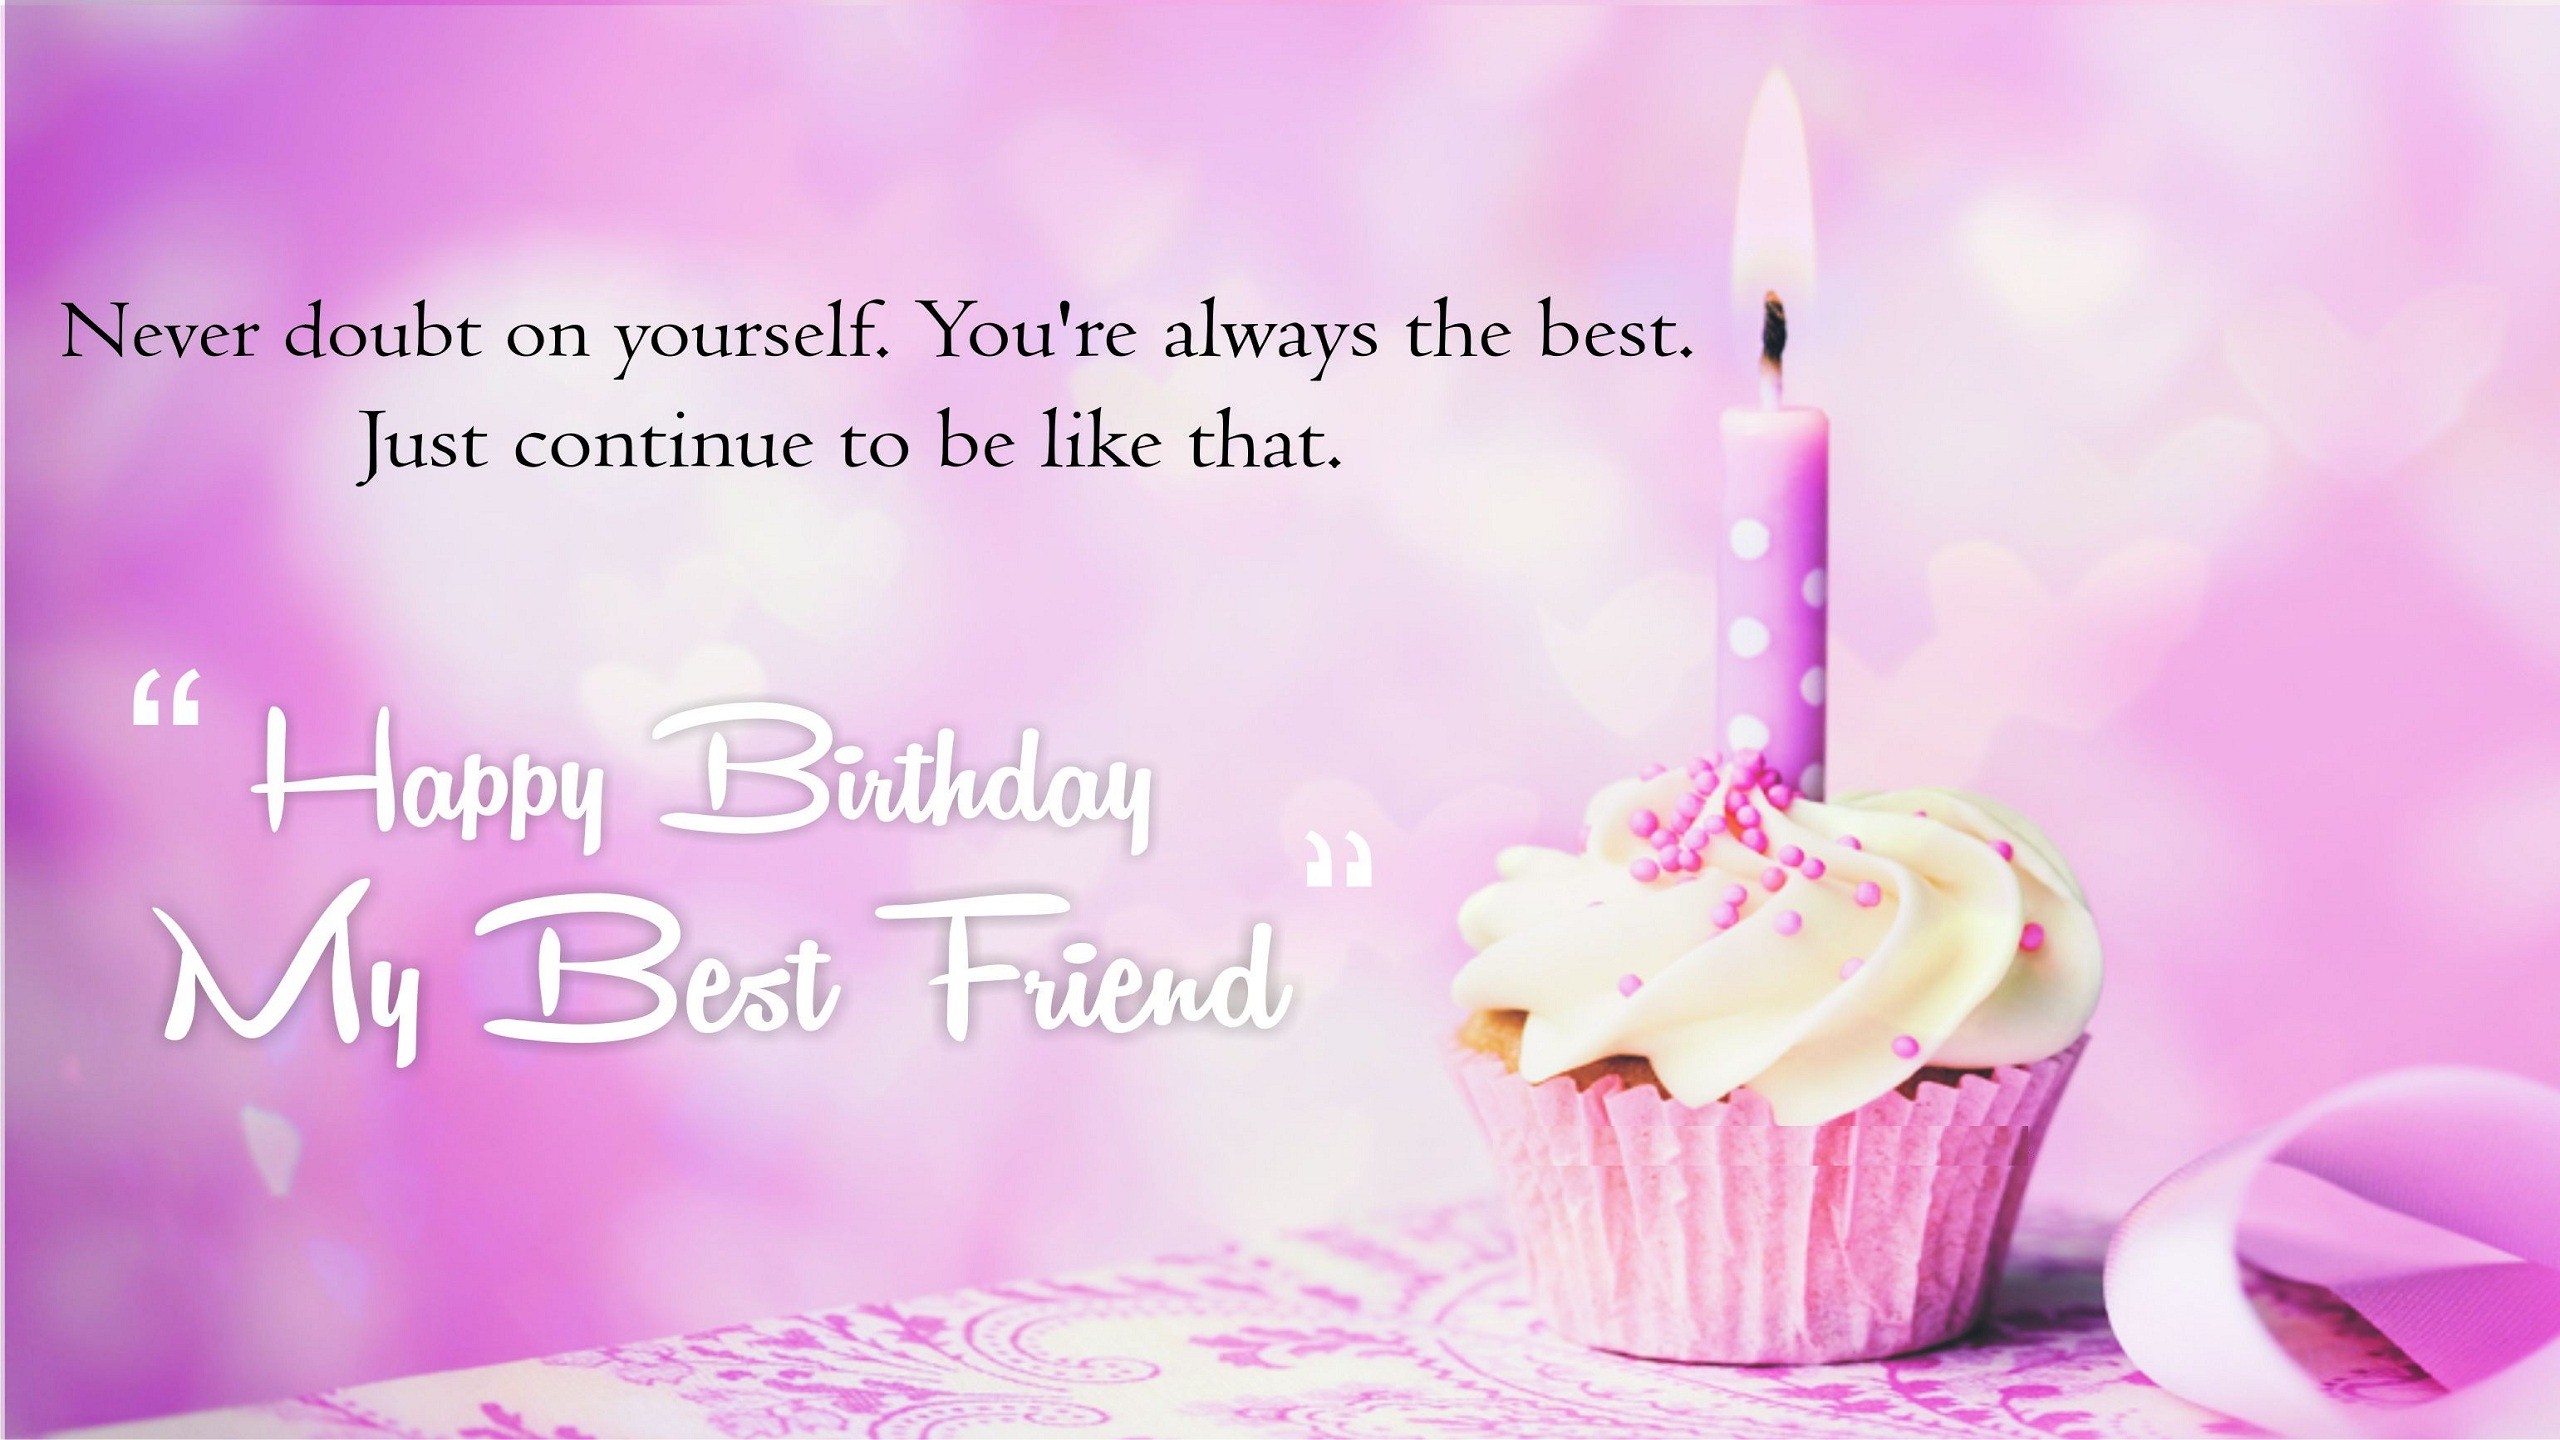 Wish You Happy Birthday My Best Friend - Quotes Of Birthday Wishes For Best Friend - HD Wallpaper 